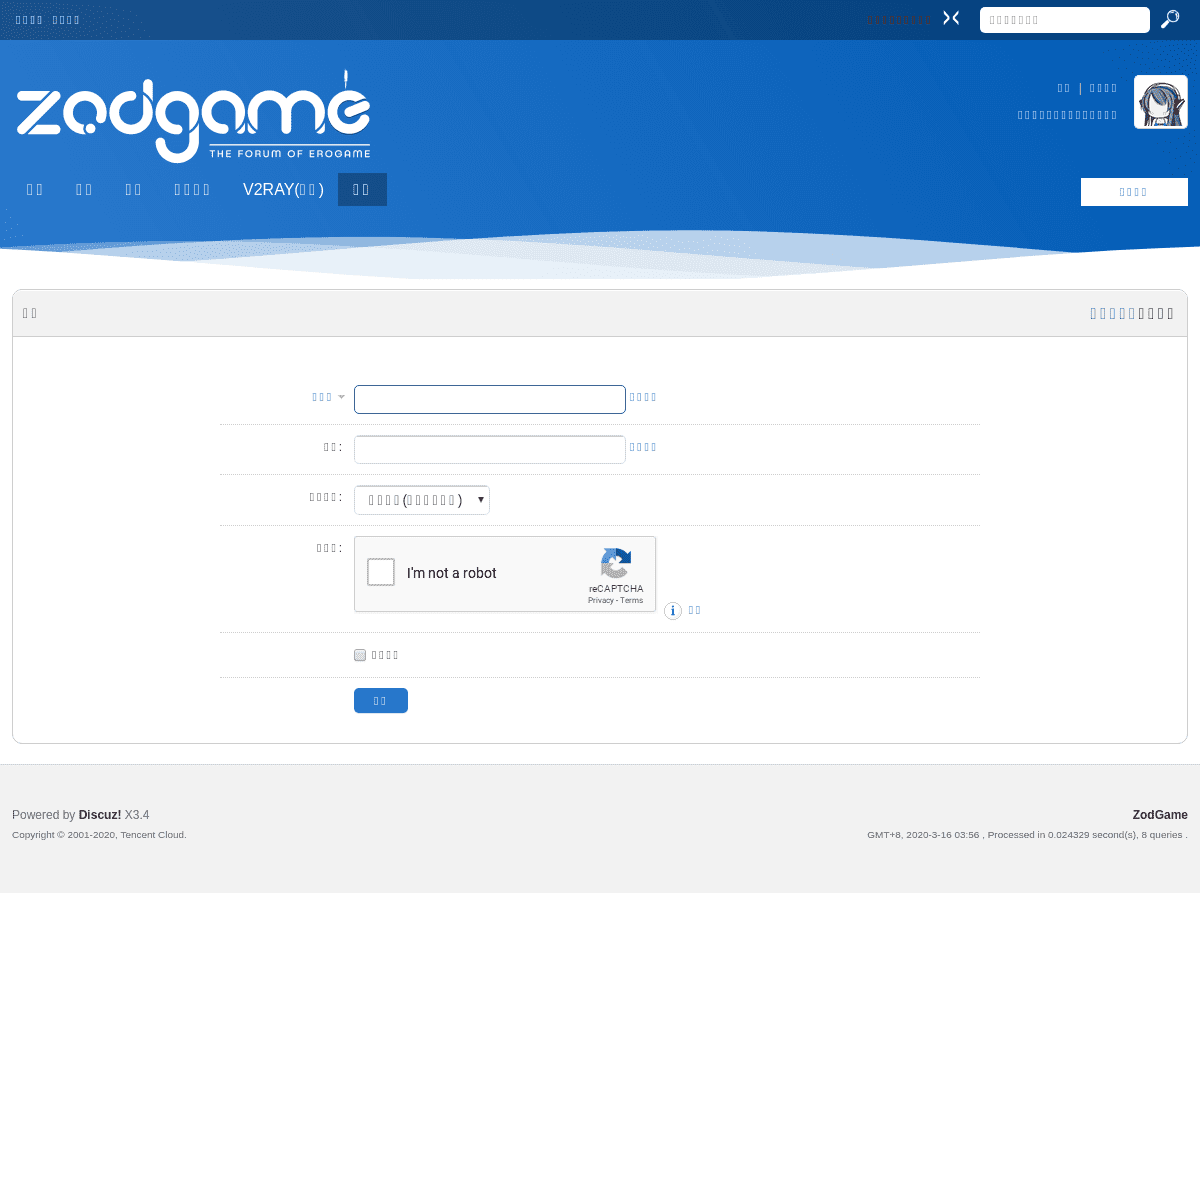 A complete backup of zodgame.us